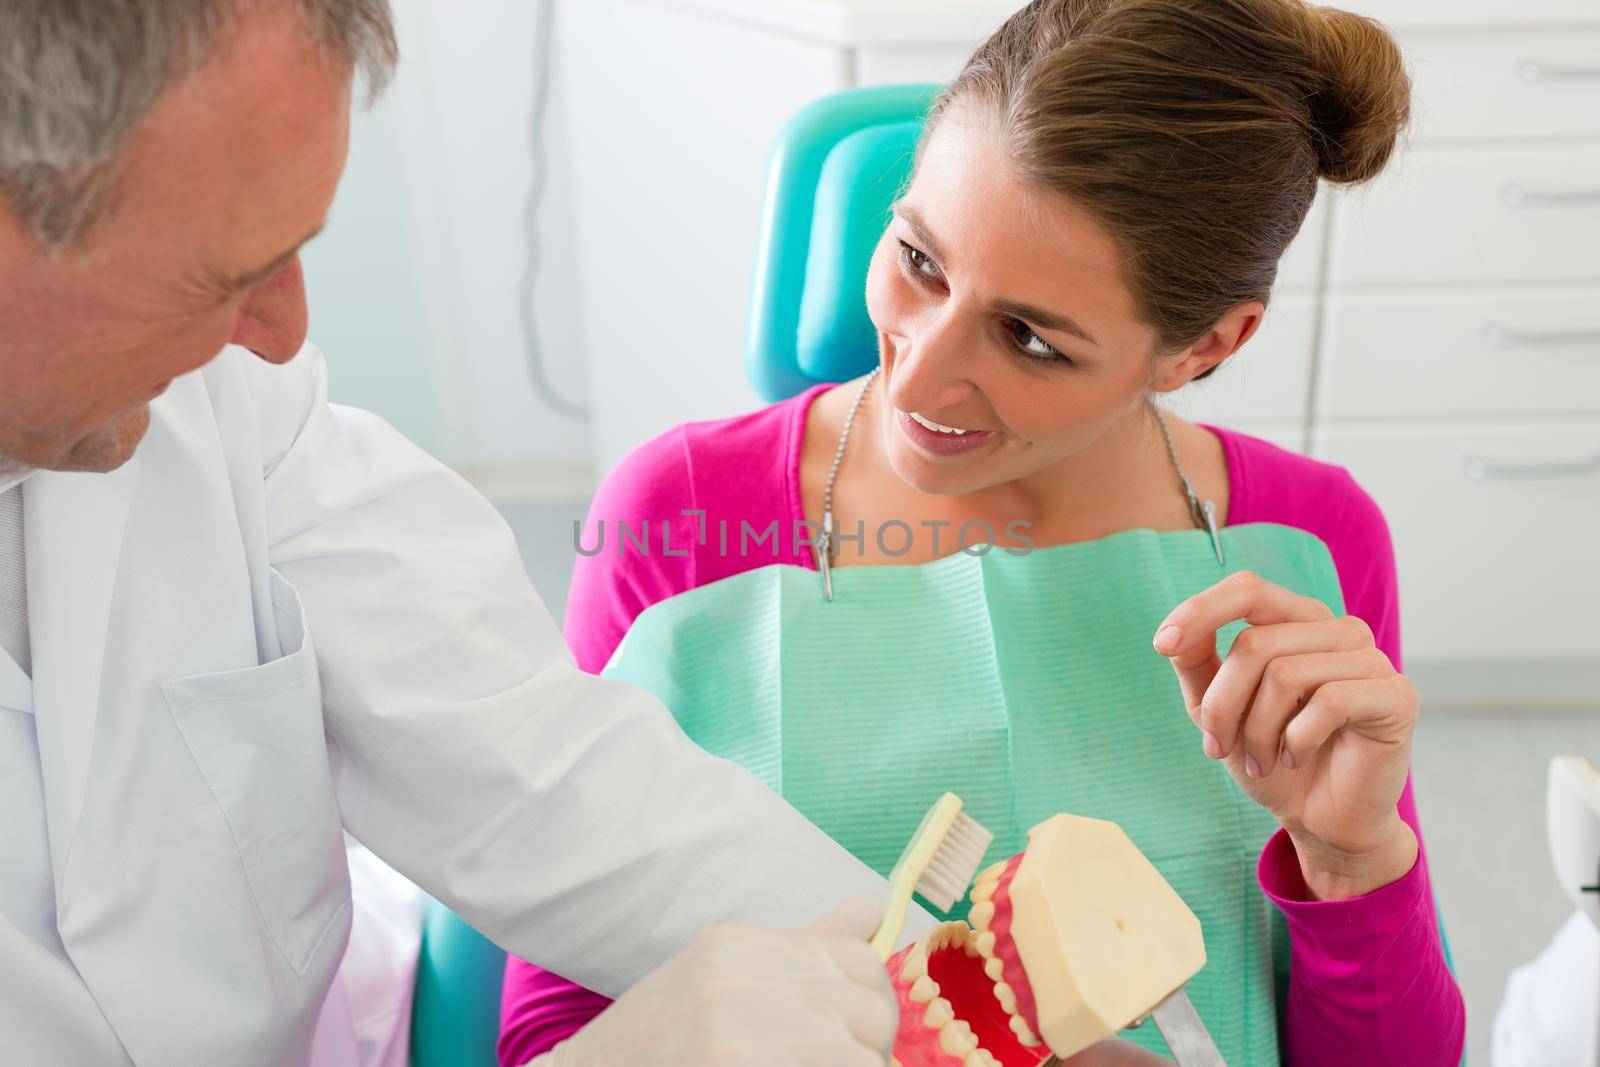 Dentist explaining teeth brushing to patient with an artificial set of teeth